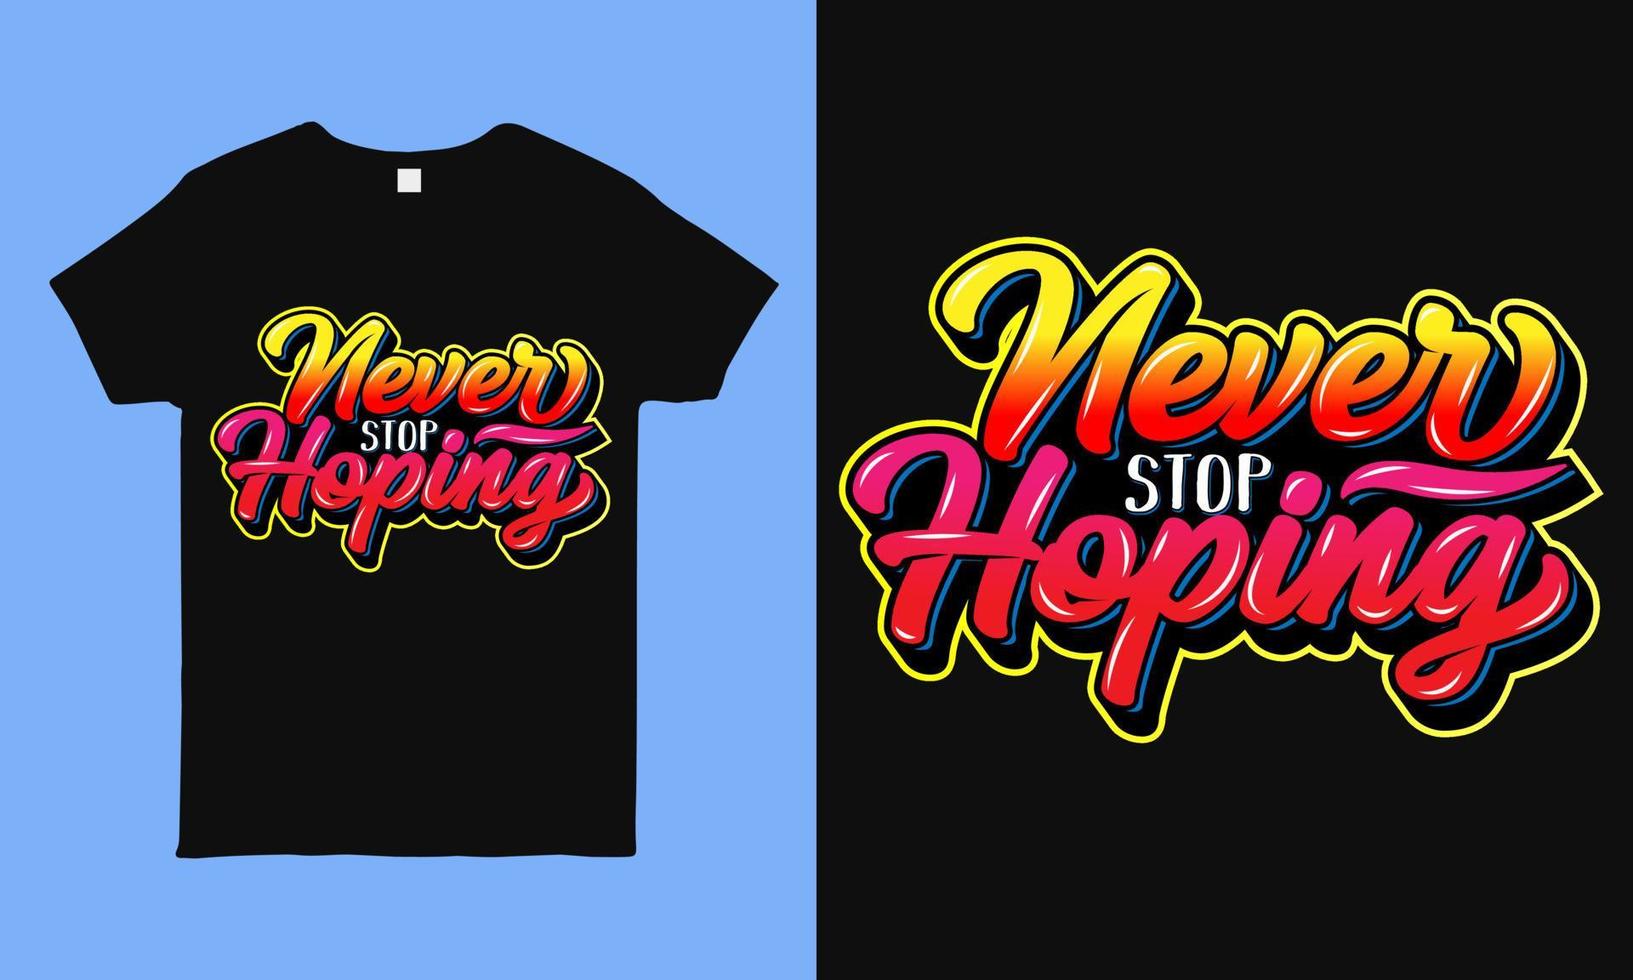 Never stop hoping. Inspirational and motivational hope quote colorful typography t shirt design during pandemic time. faithful saying hand drawn shirt design for man, woman and children vector